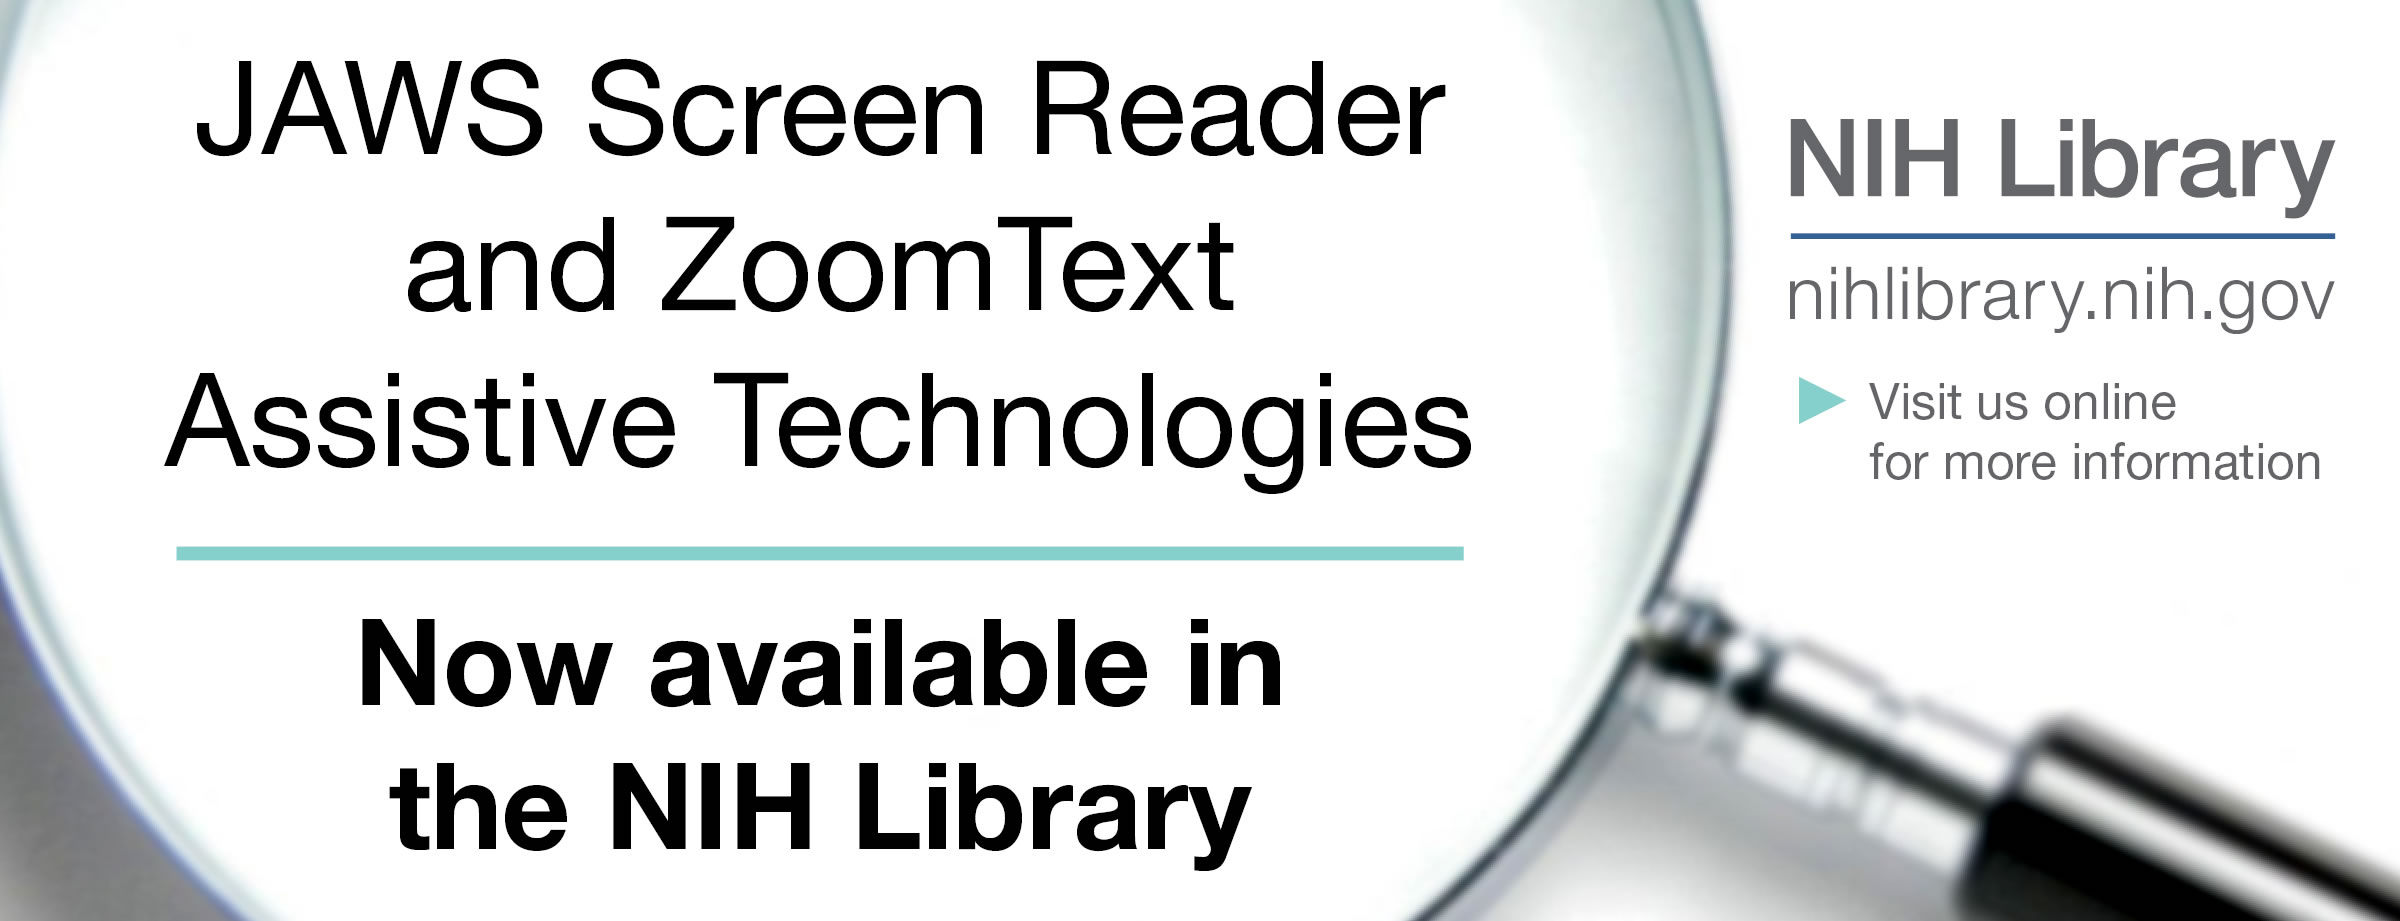 Assistive technologies now available in the NIH Library